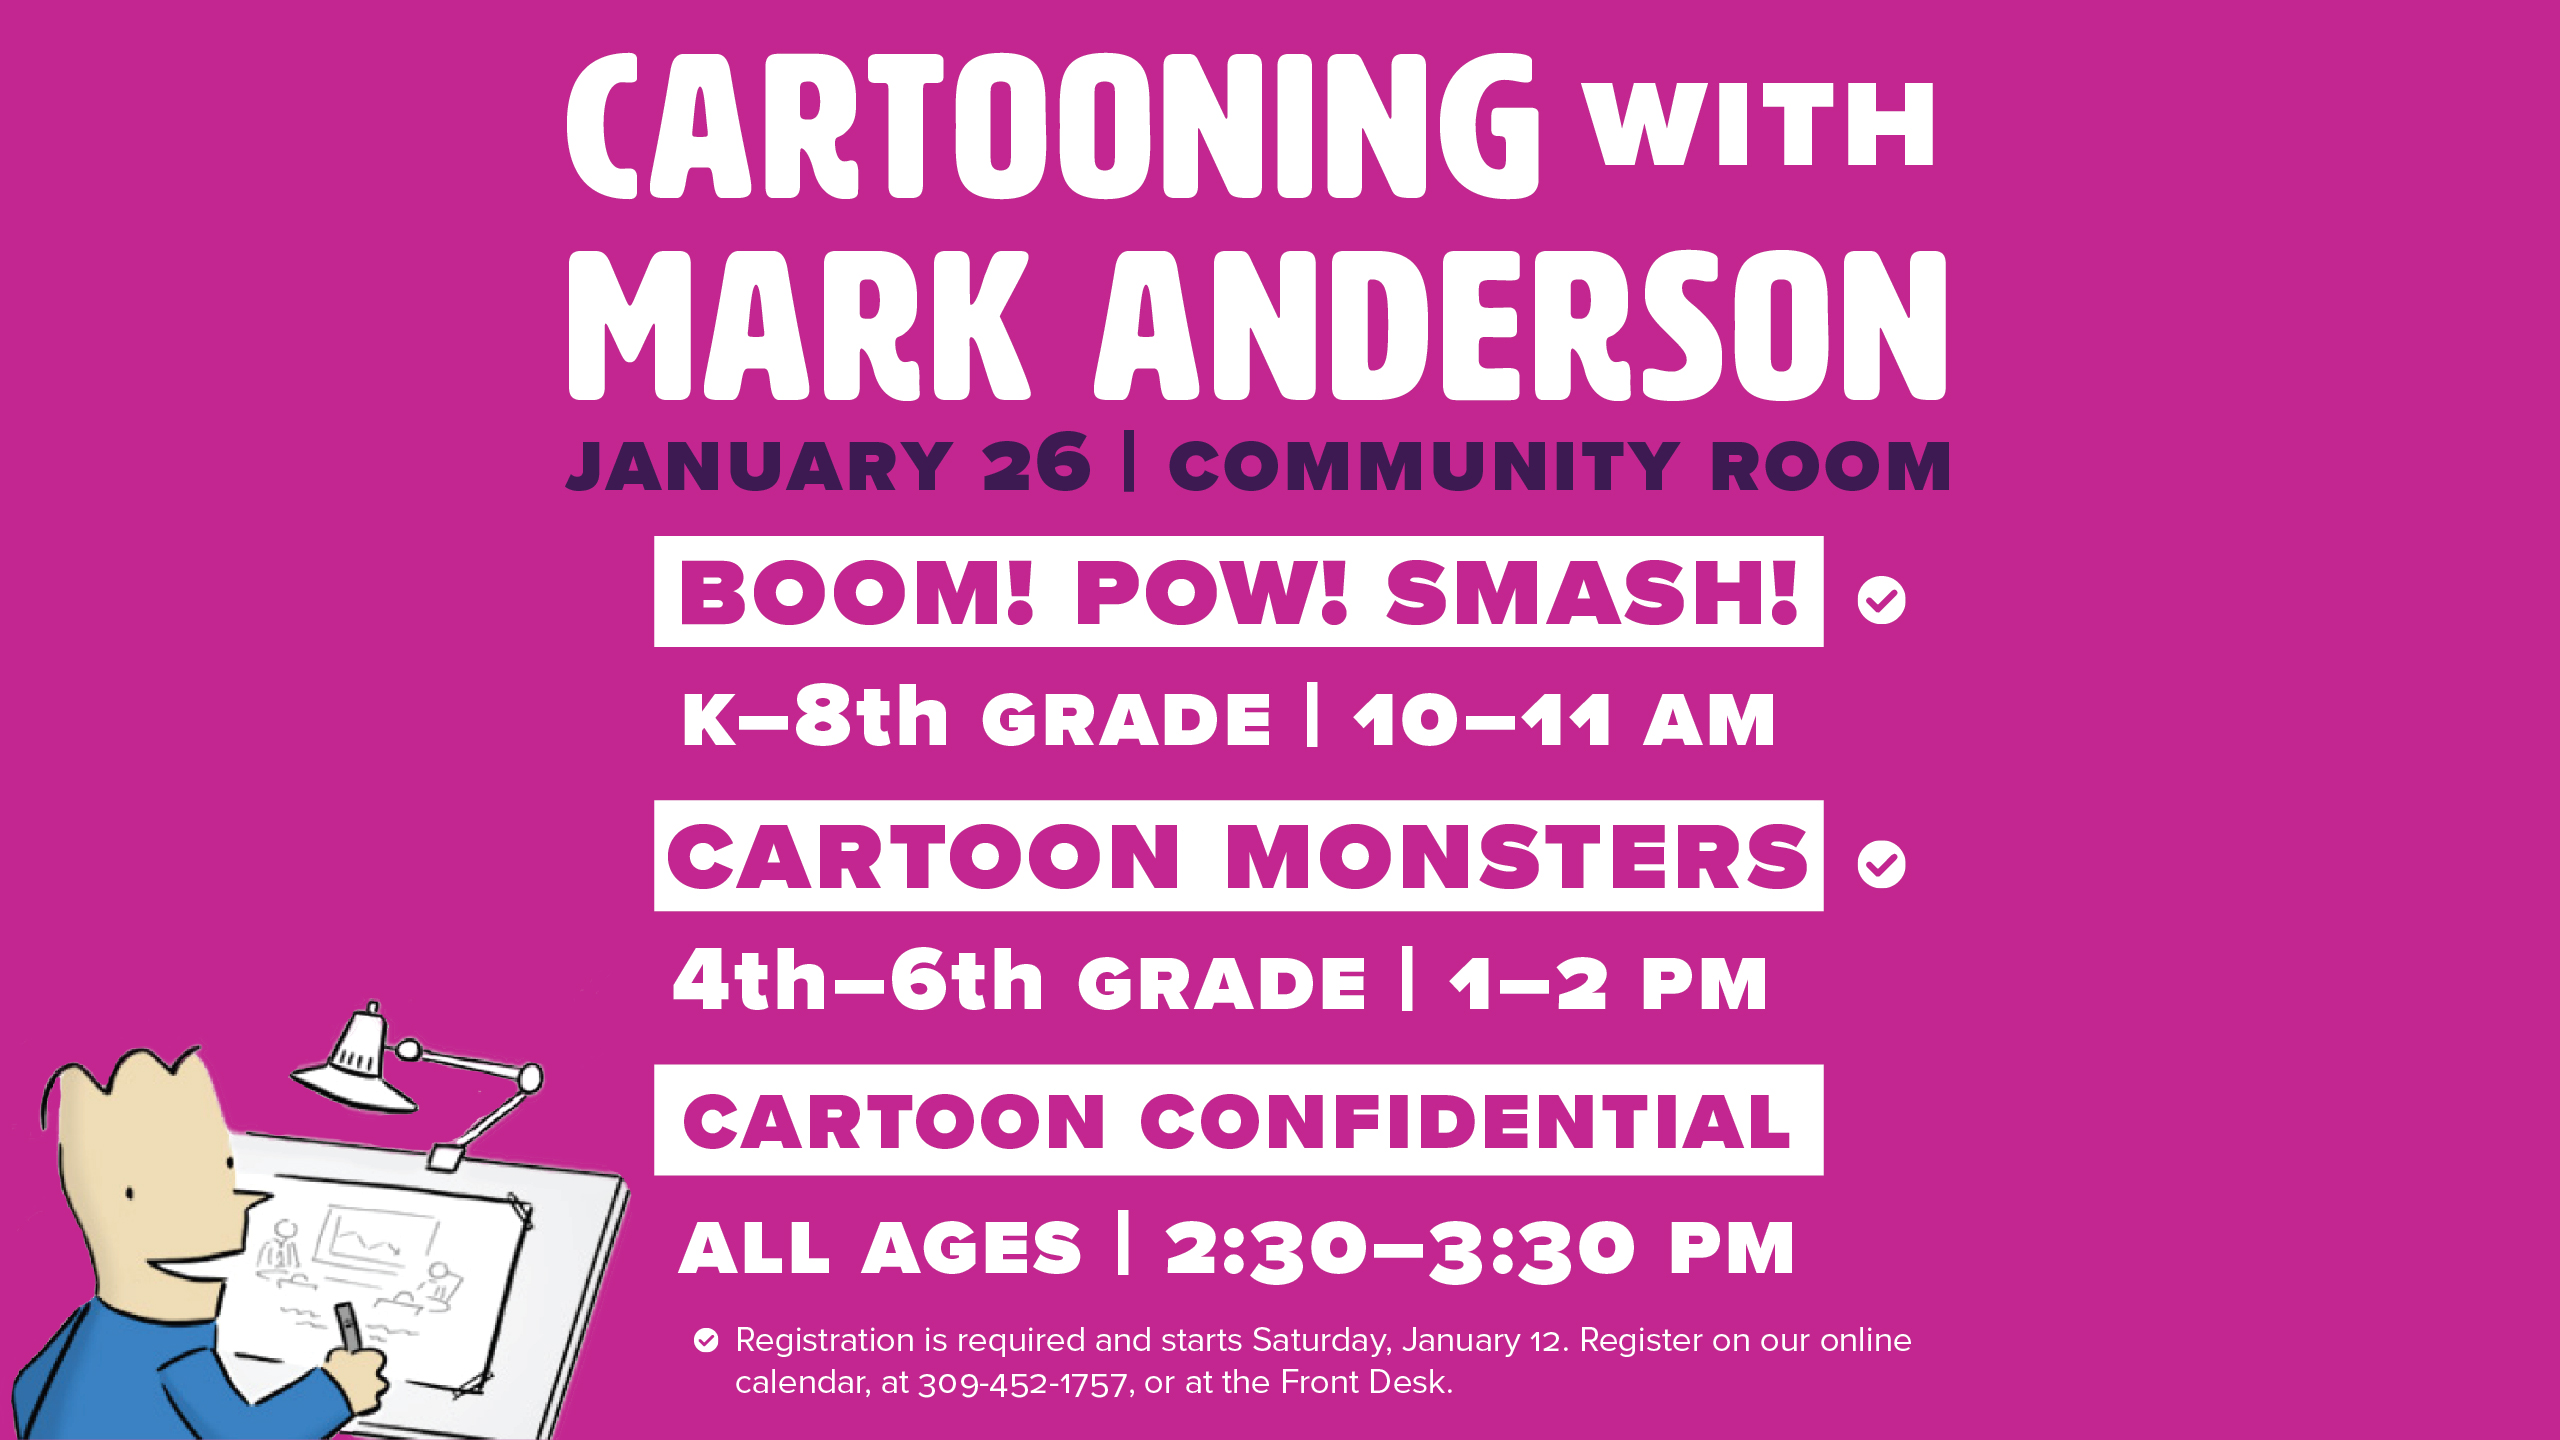 Cartooning with Mark Anderson